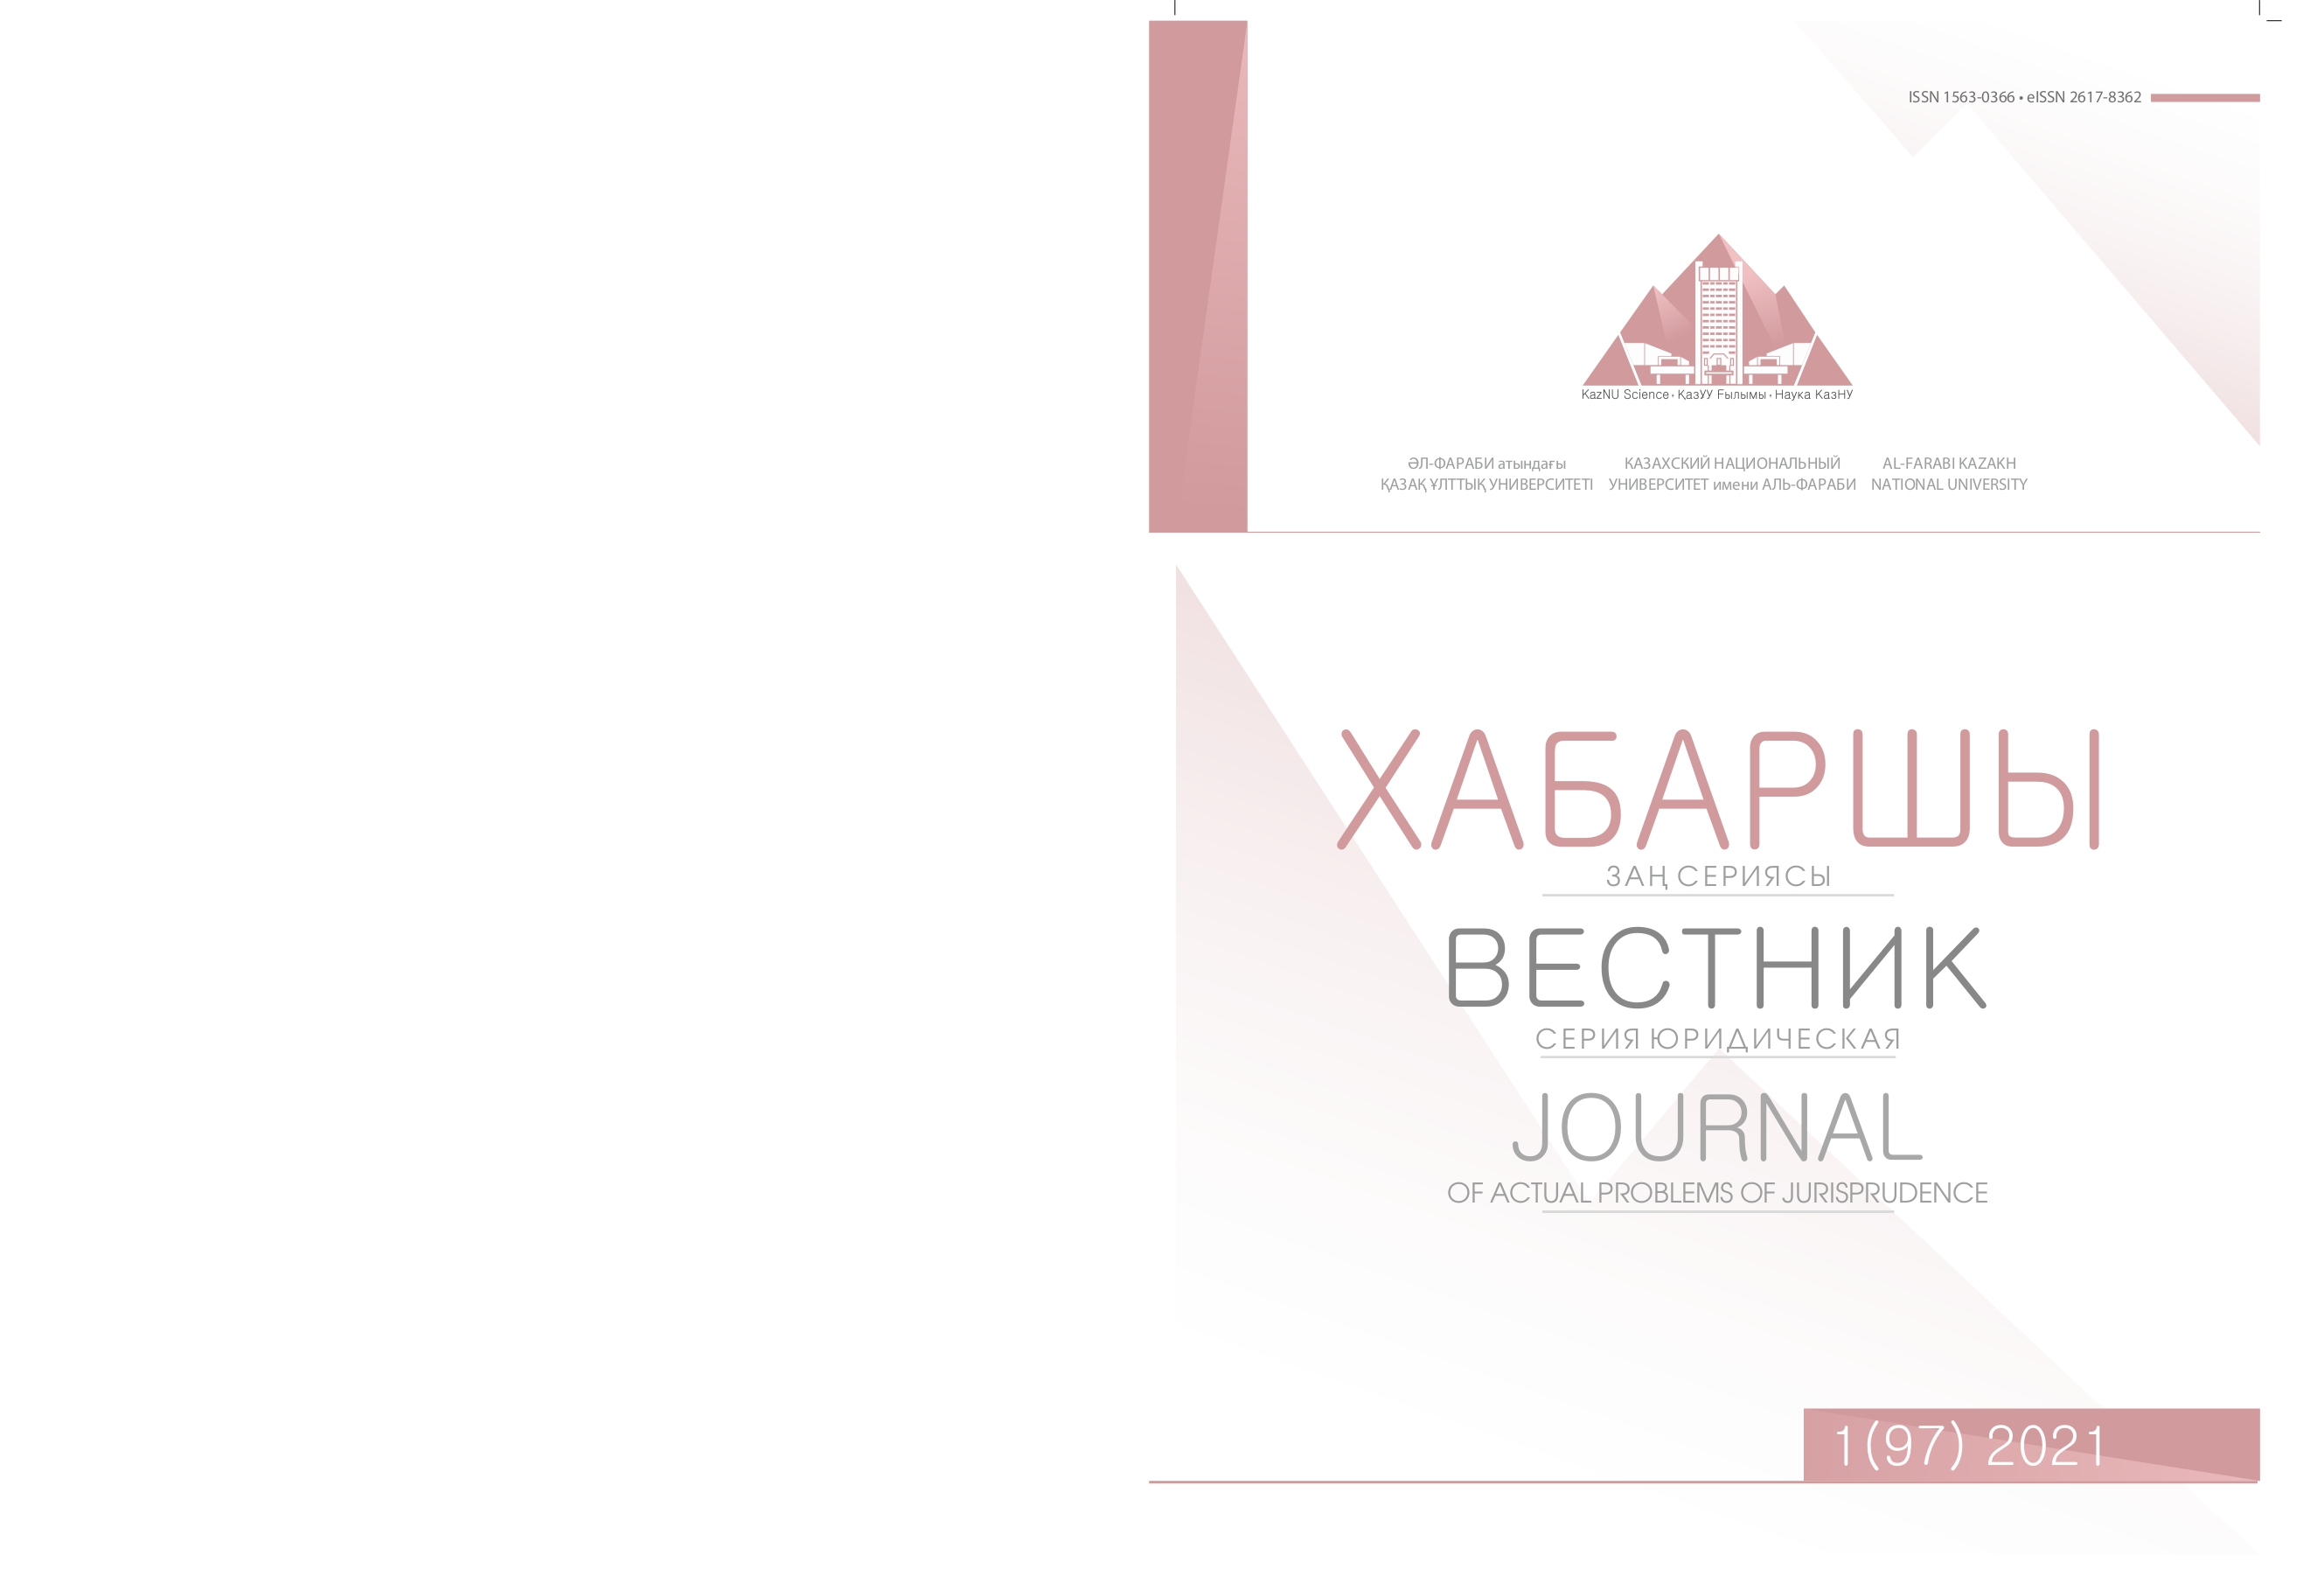 					View Vol. 97 No. 1 (2021): Journal of Actual Problems of jurispredence
				